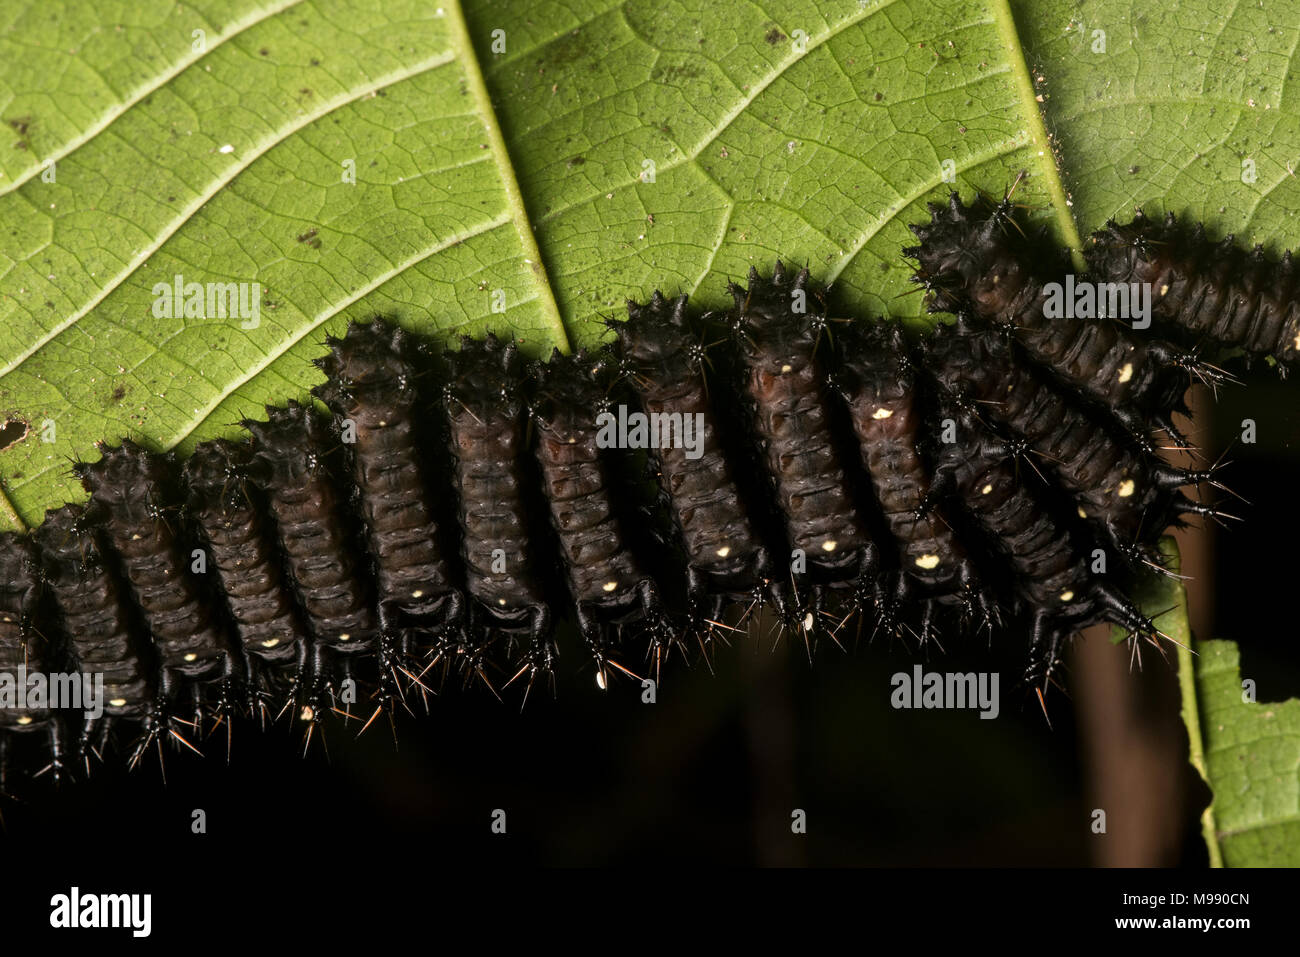 A large group of slug moth caterpillars on a leaf, eating the foliage.  These slug caterpillars pack a powerful sting as a predator deterrent. Stock Photo